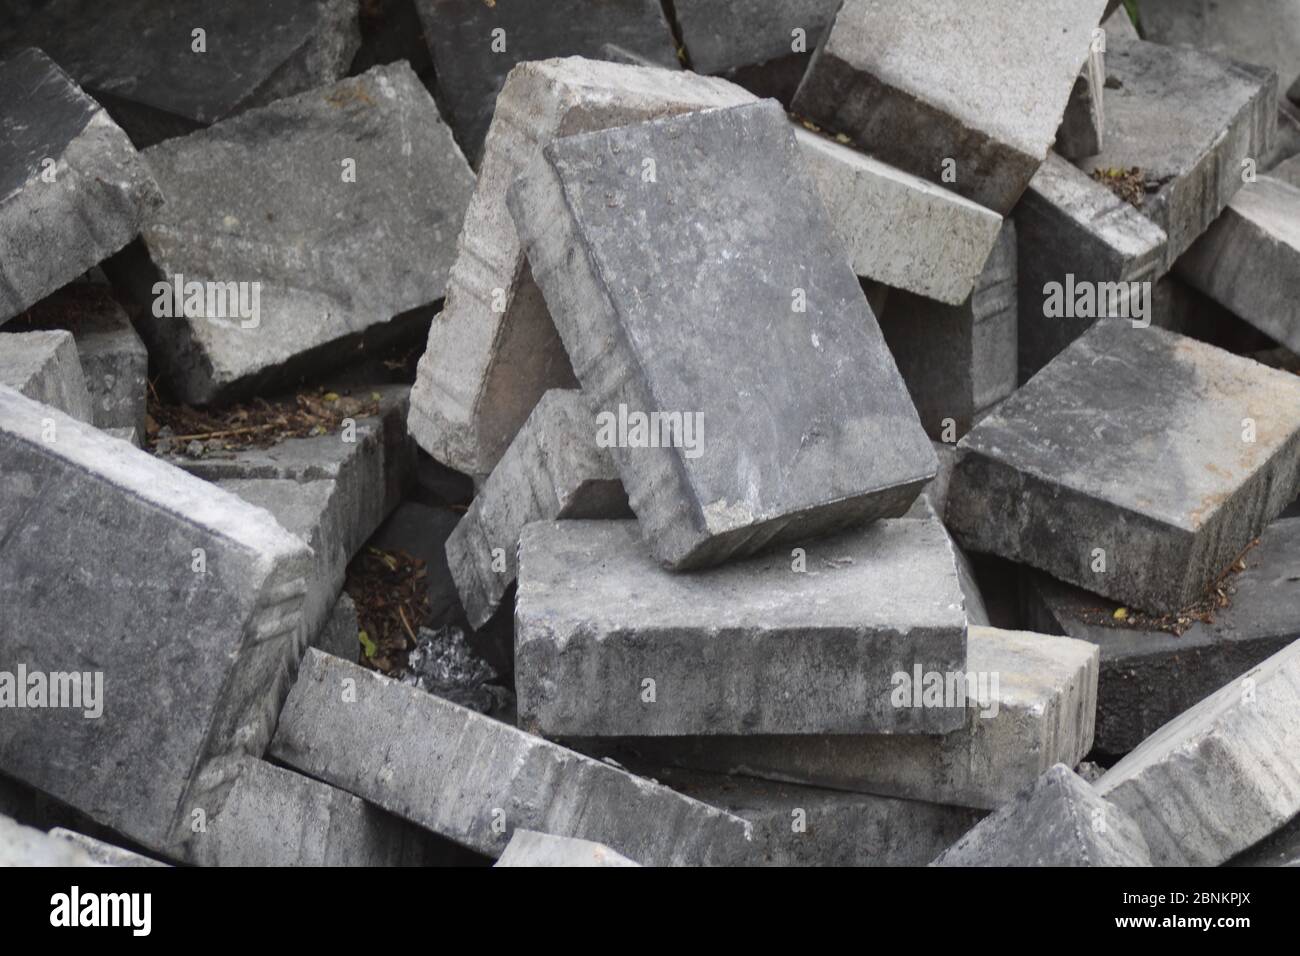 a stack of stones Stock Photo